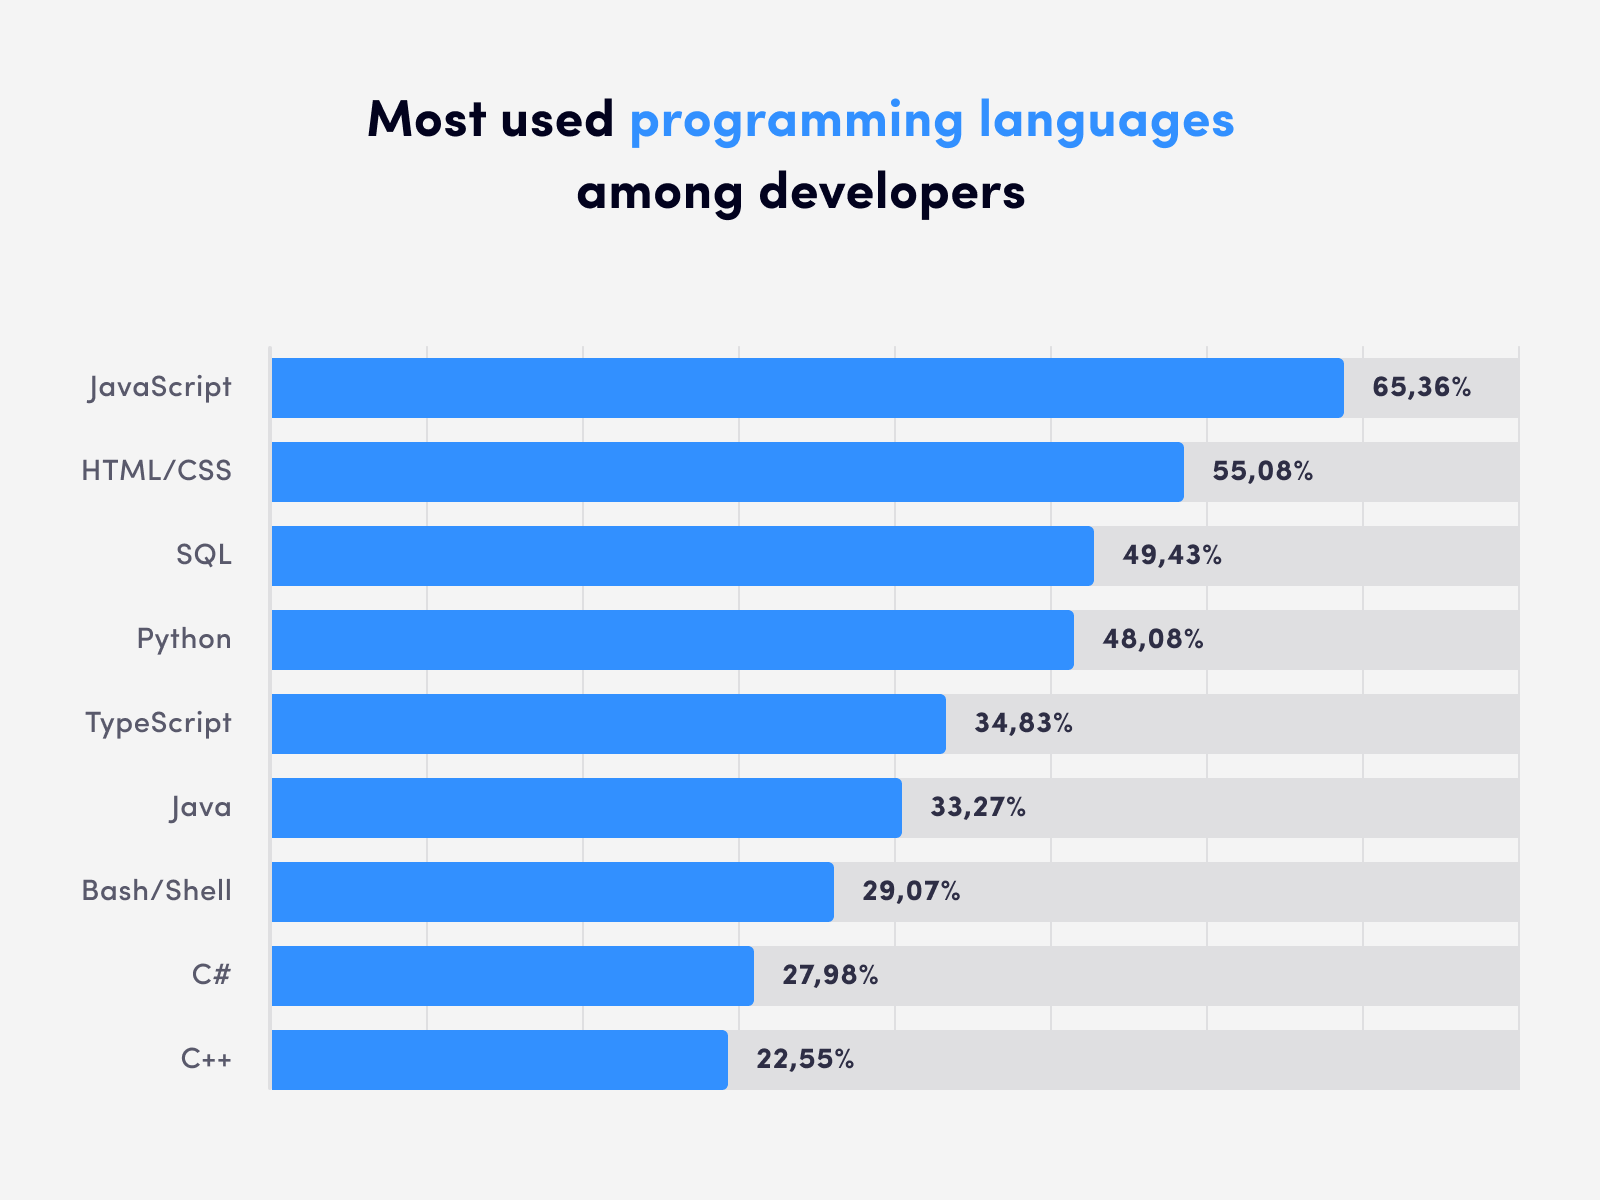 The most used programming languages